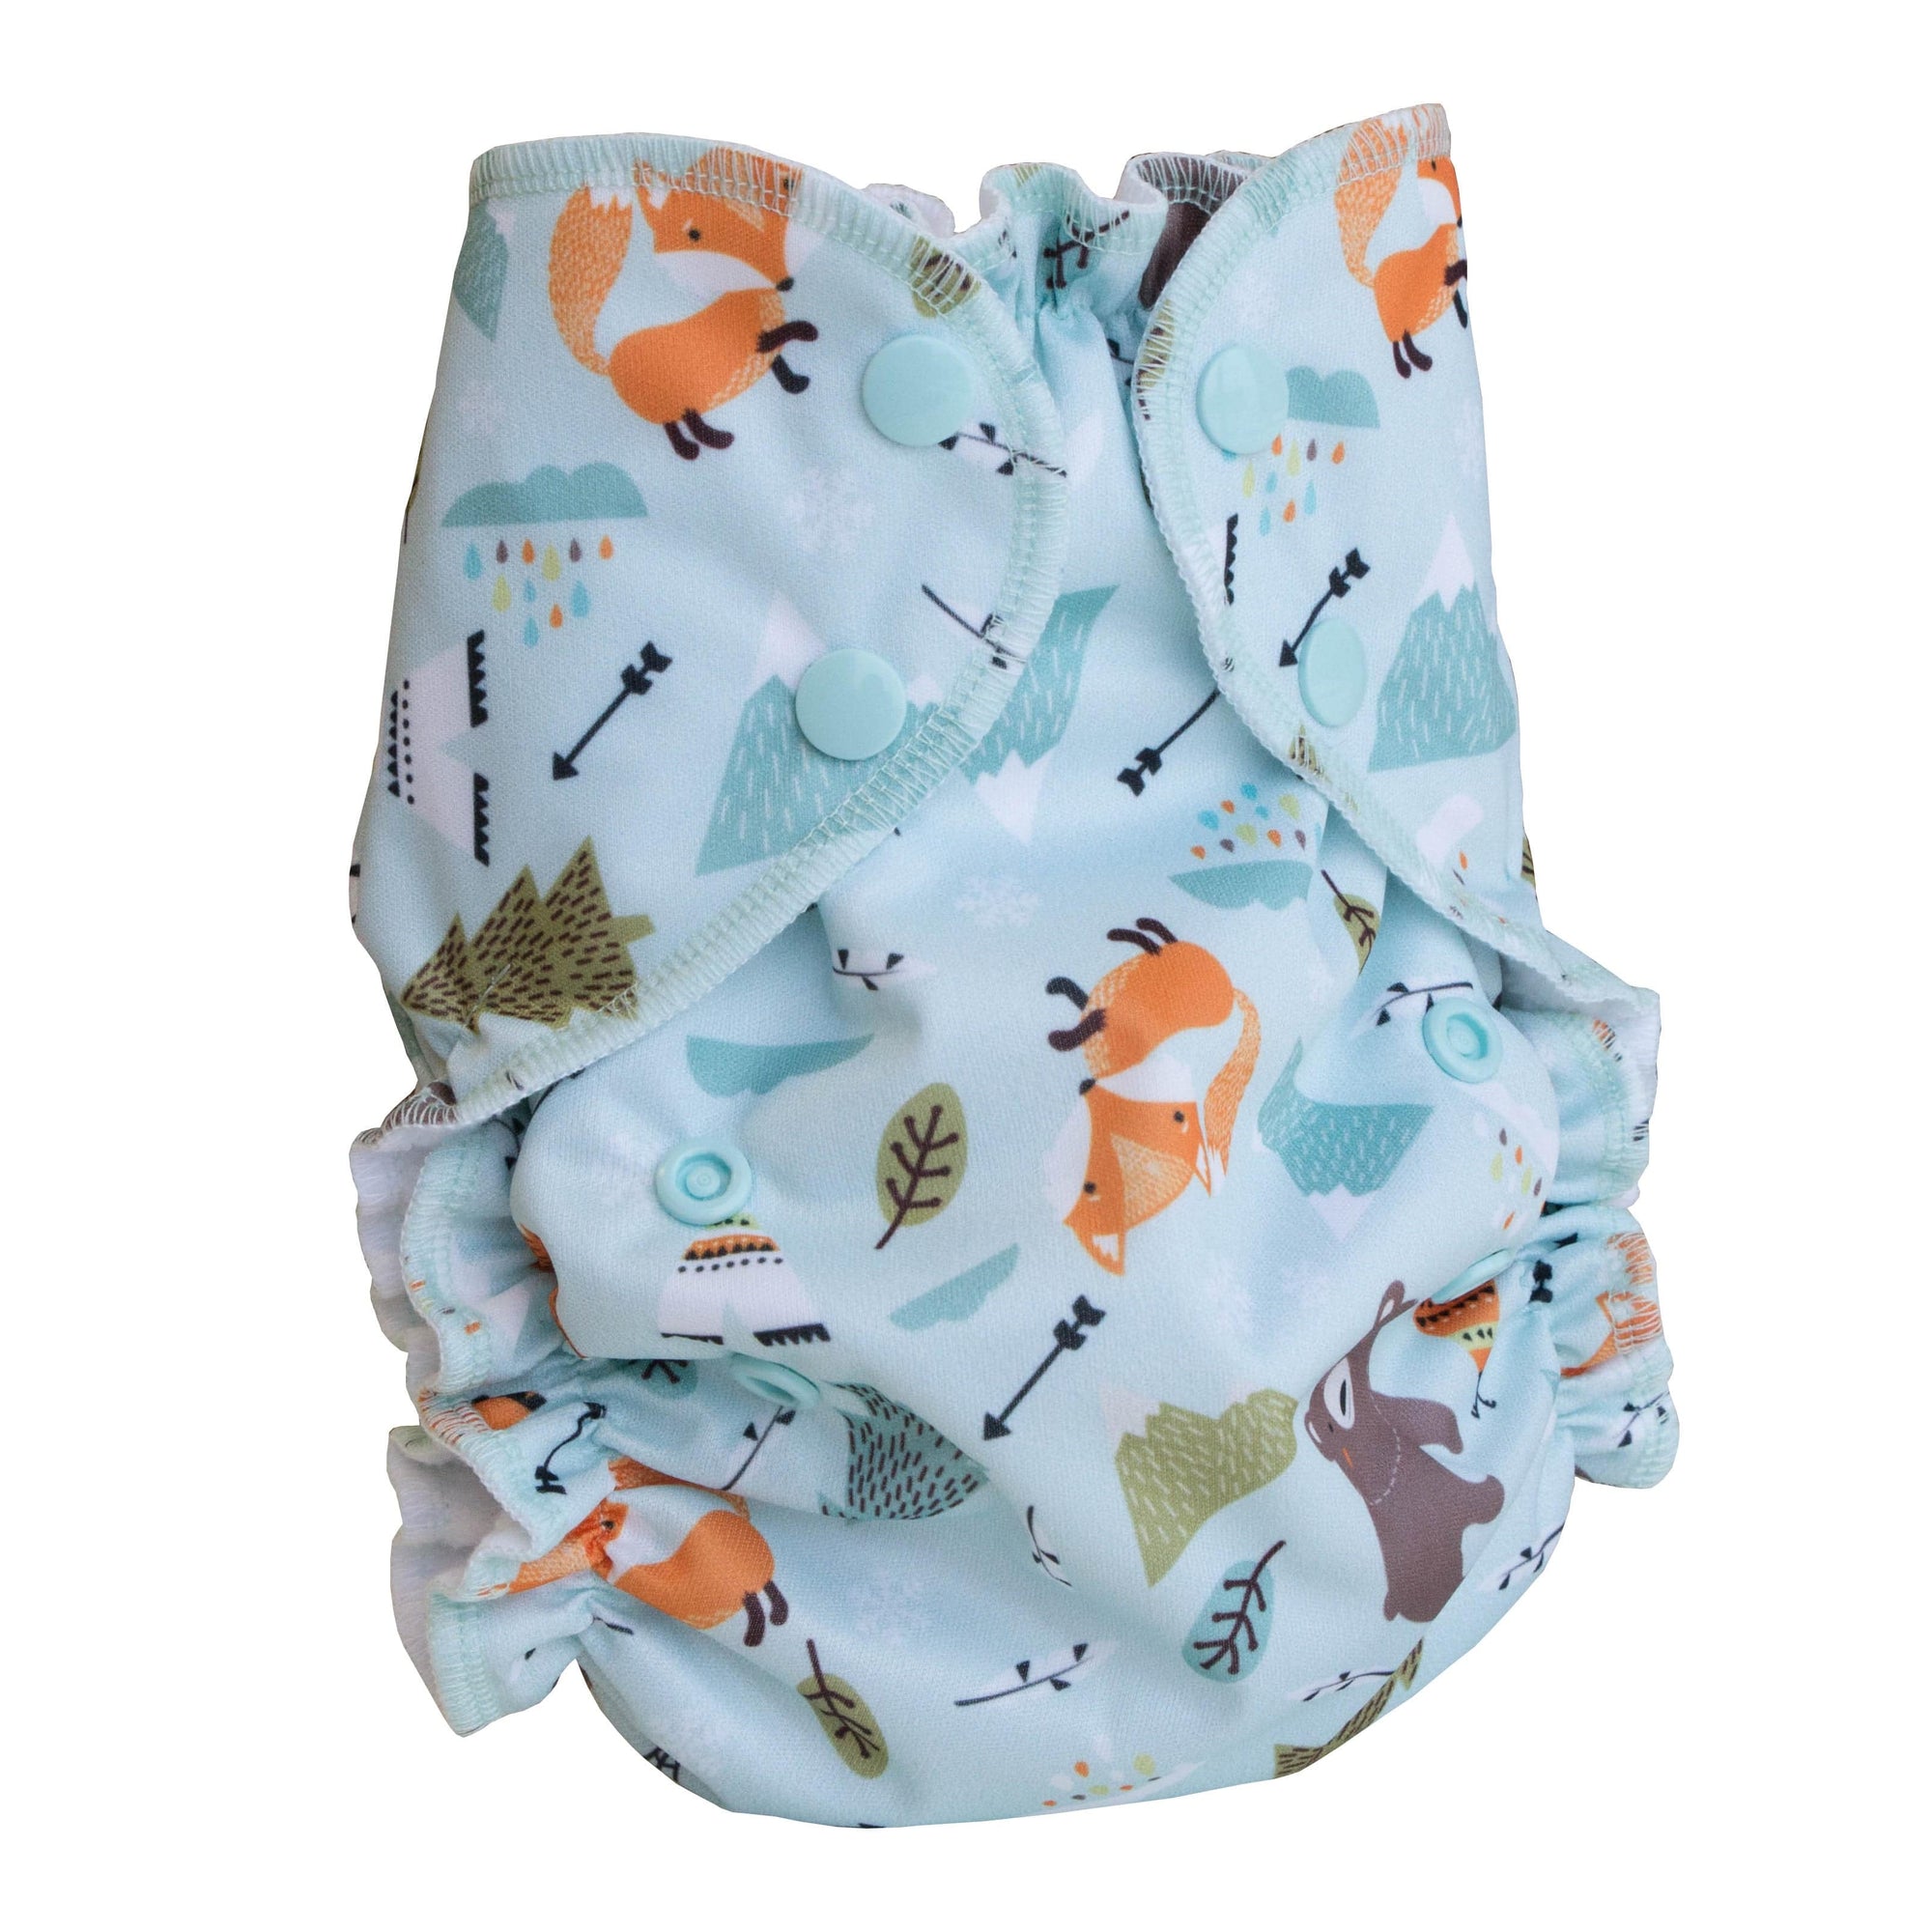 AMP Diapers cloth diaper AMP Diapers One Size Duo Pocket Diaper - The Fox and the Bear